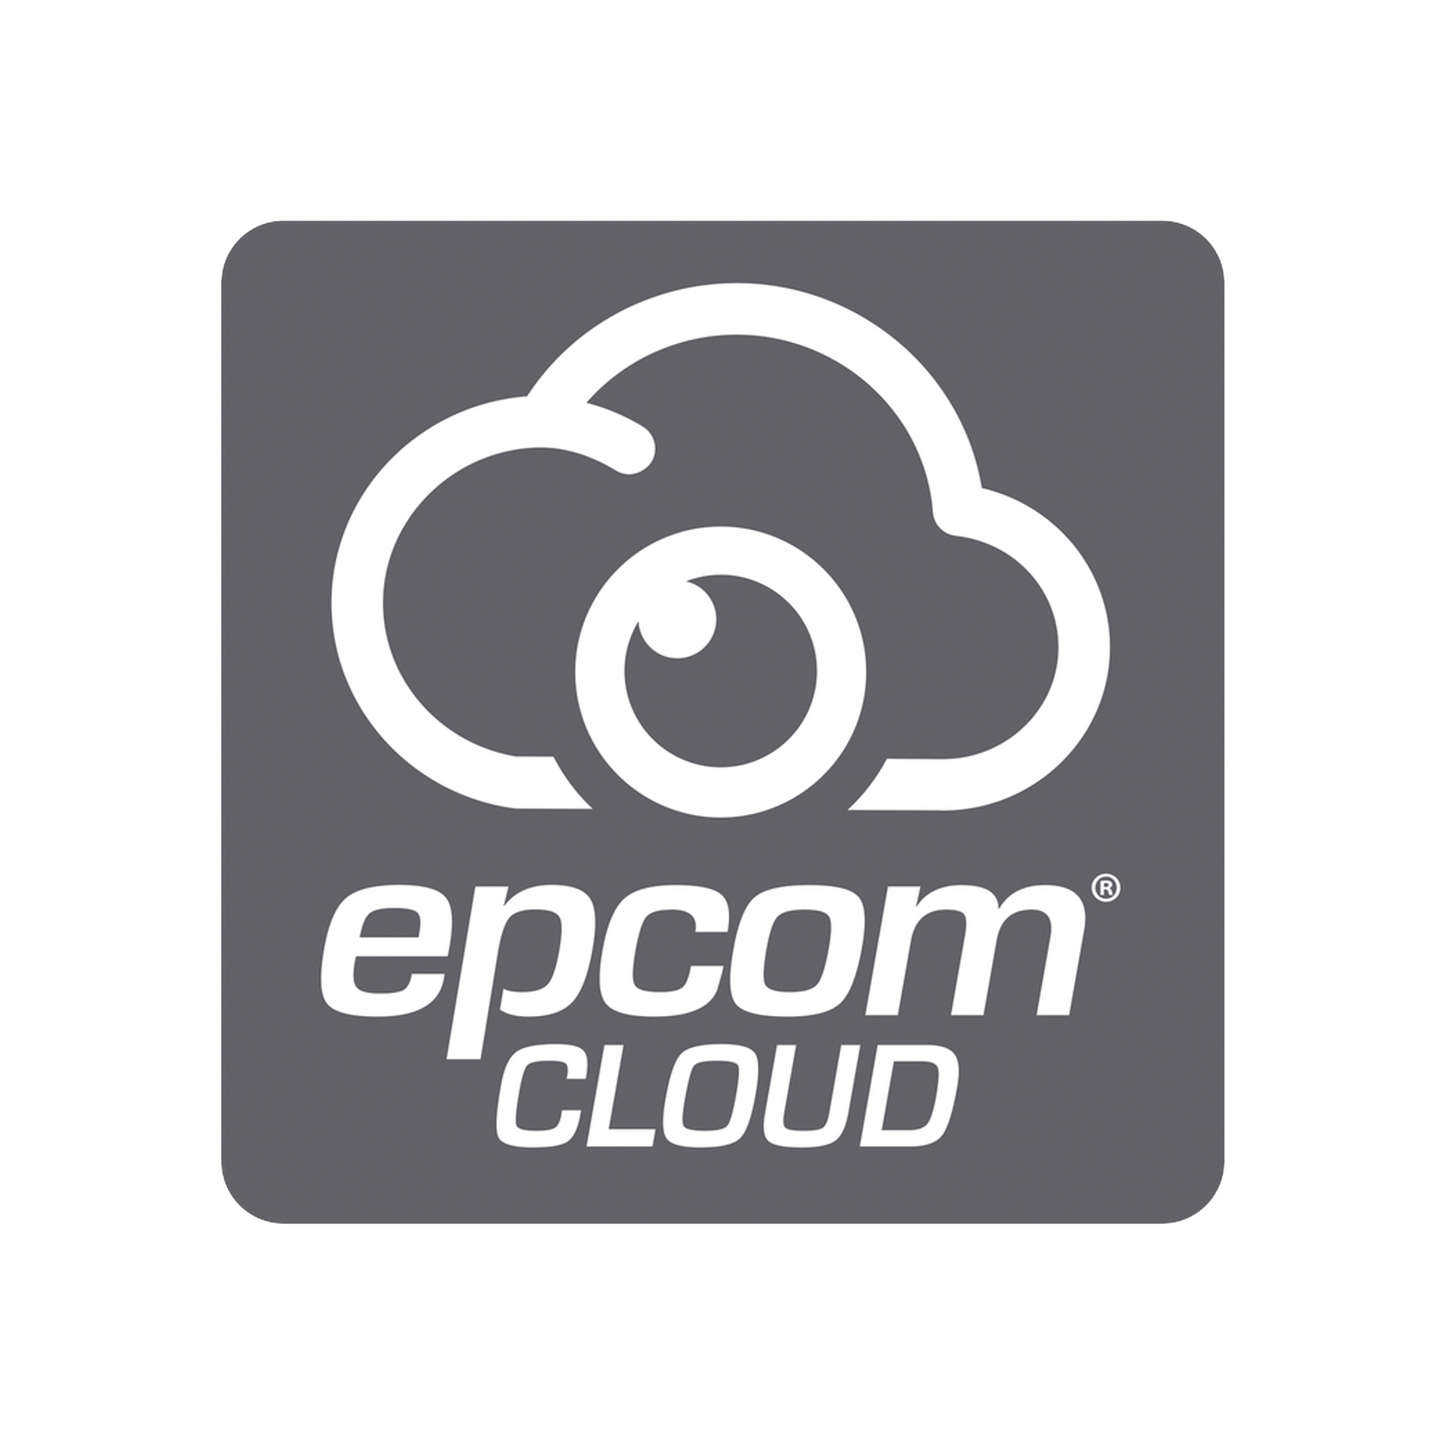 Epcom Cloud Annual Subscription / Cloud recording for 1 video channel at 8MP with 14 days retention / Continuous recording